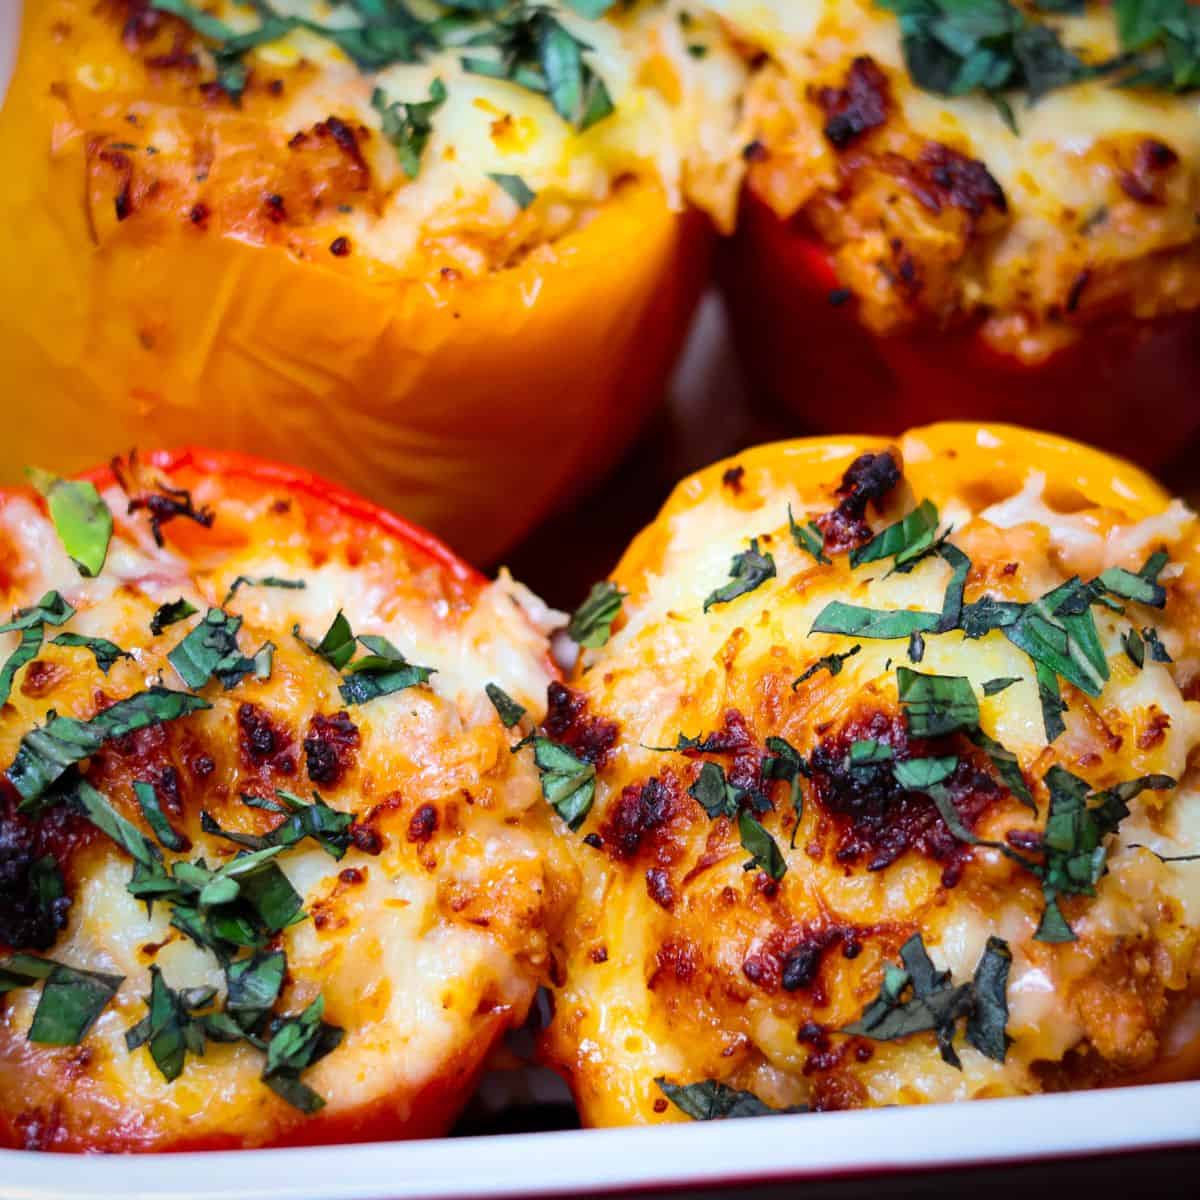 Freshly baked stuffed bell peppers in a casserole dish, cheese melted and slightly browned, garnished with finely chopped basil.